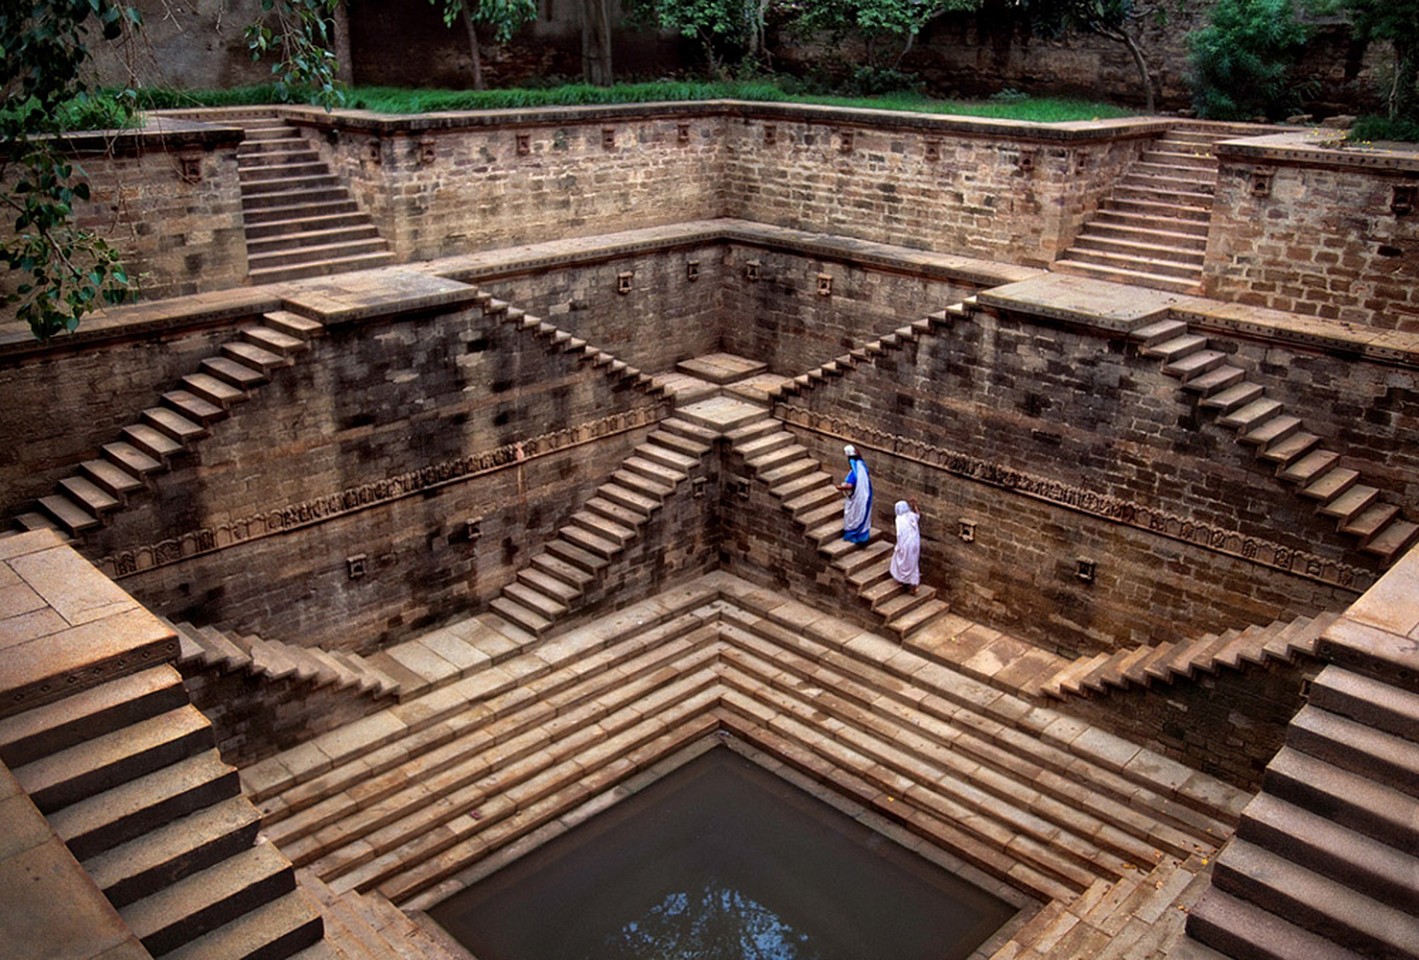 Steve McCurry, Rajasthan Stepwell
FujiFlex Crystal Archive Print, 20 x 24 in. (Inquire for additional sizes)
INDIA-10875.2015